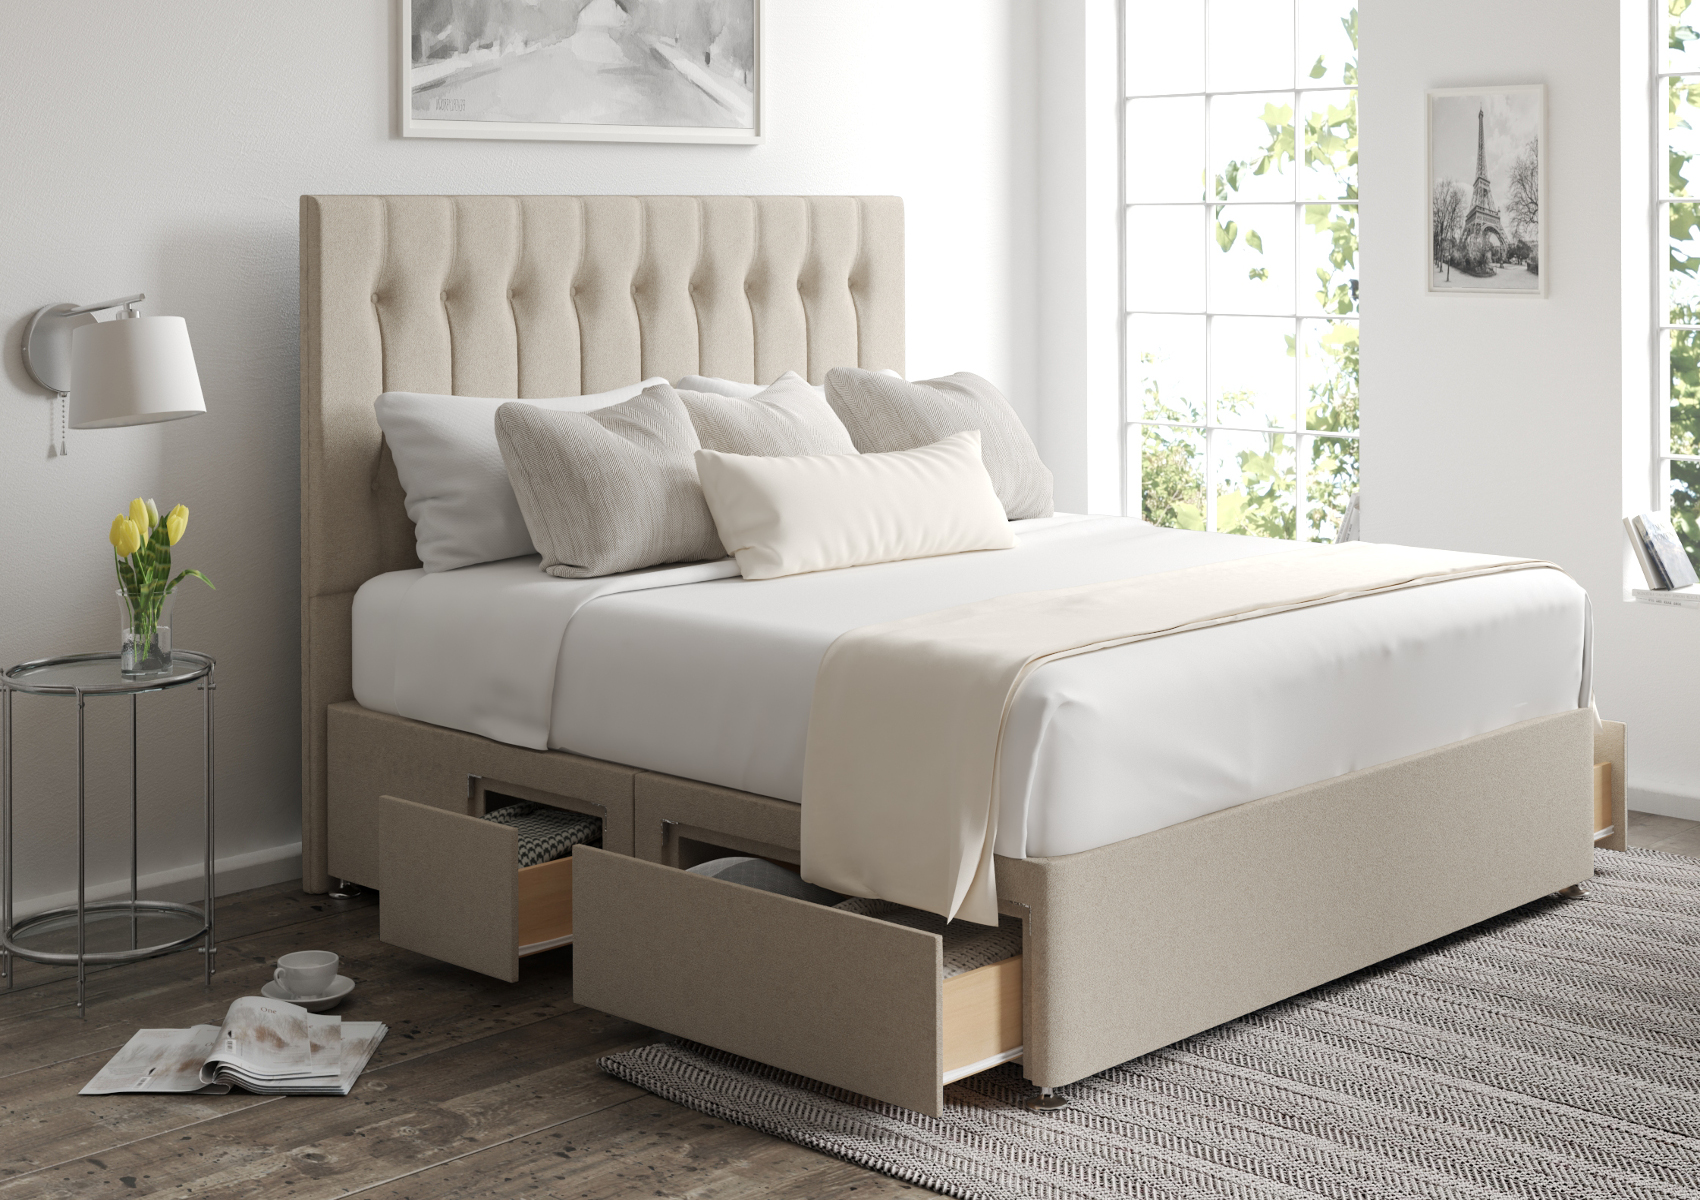 View Rylee Arran Natural Upholstered Compact Double Bed Time4Sleep information